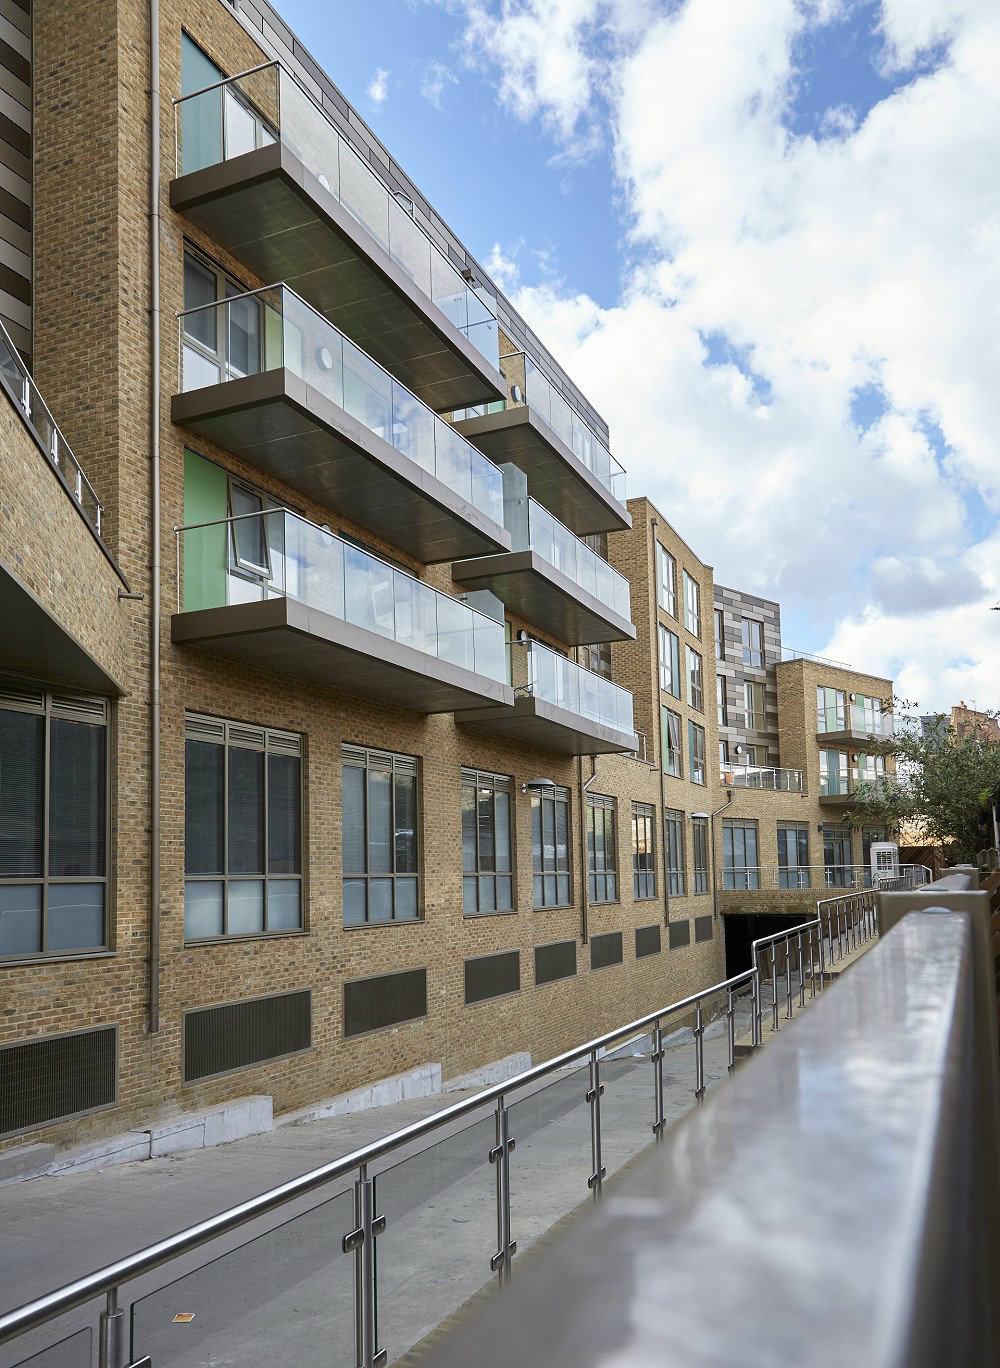 Flats in London glazed by EYG Commercial